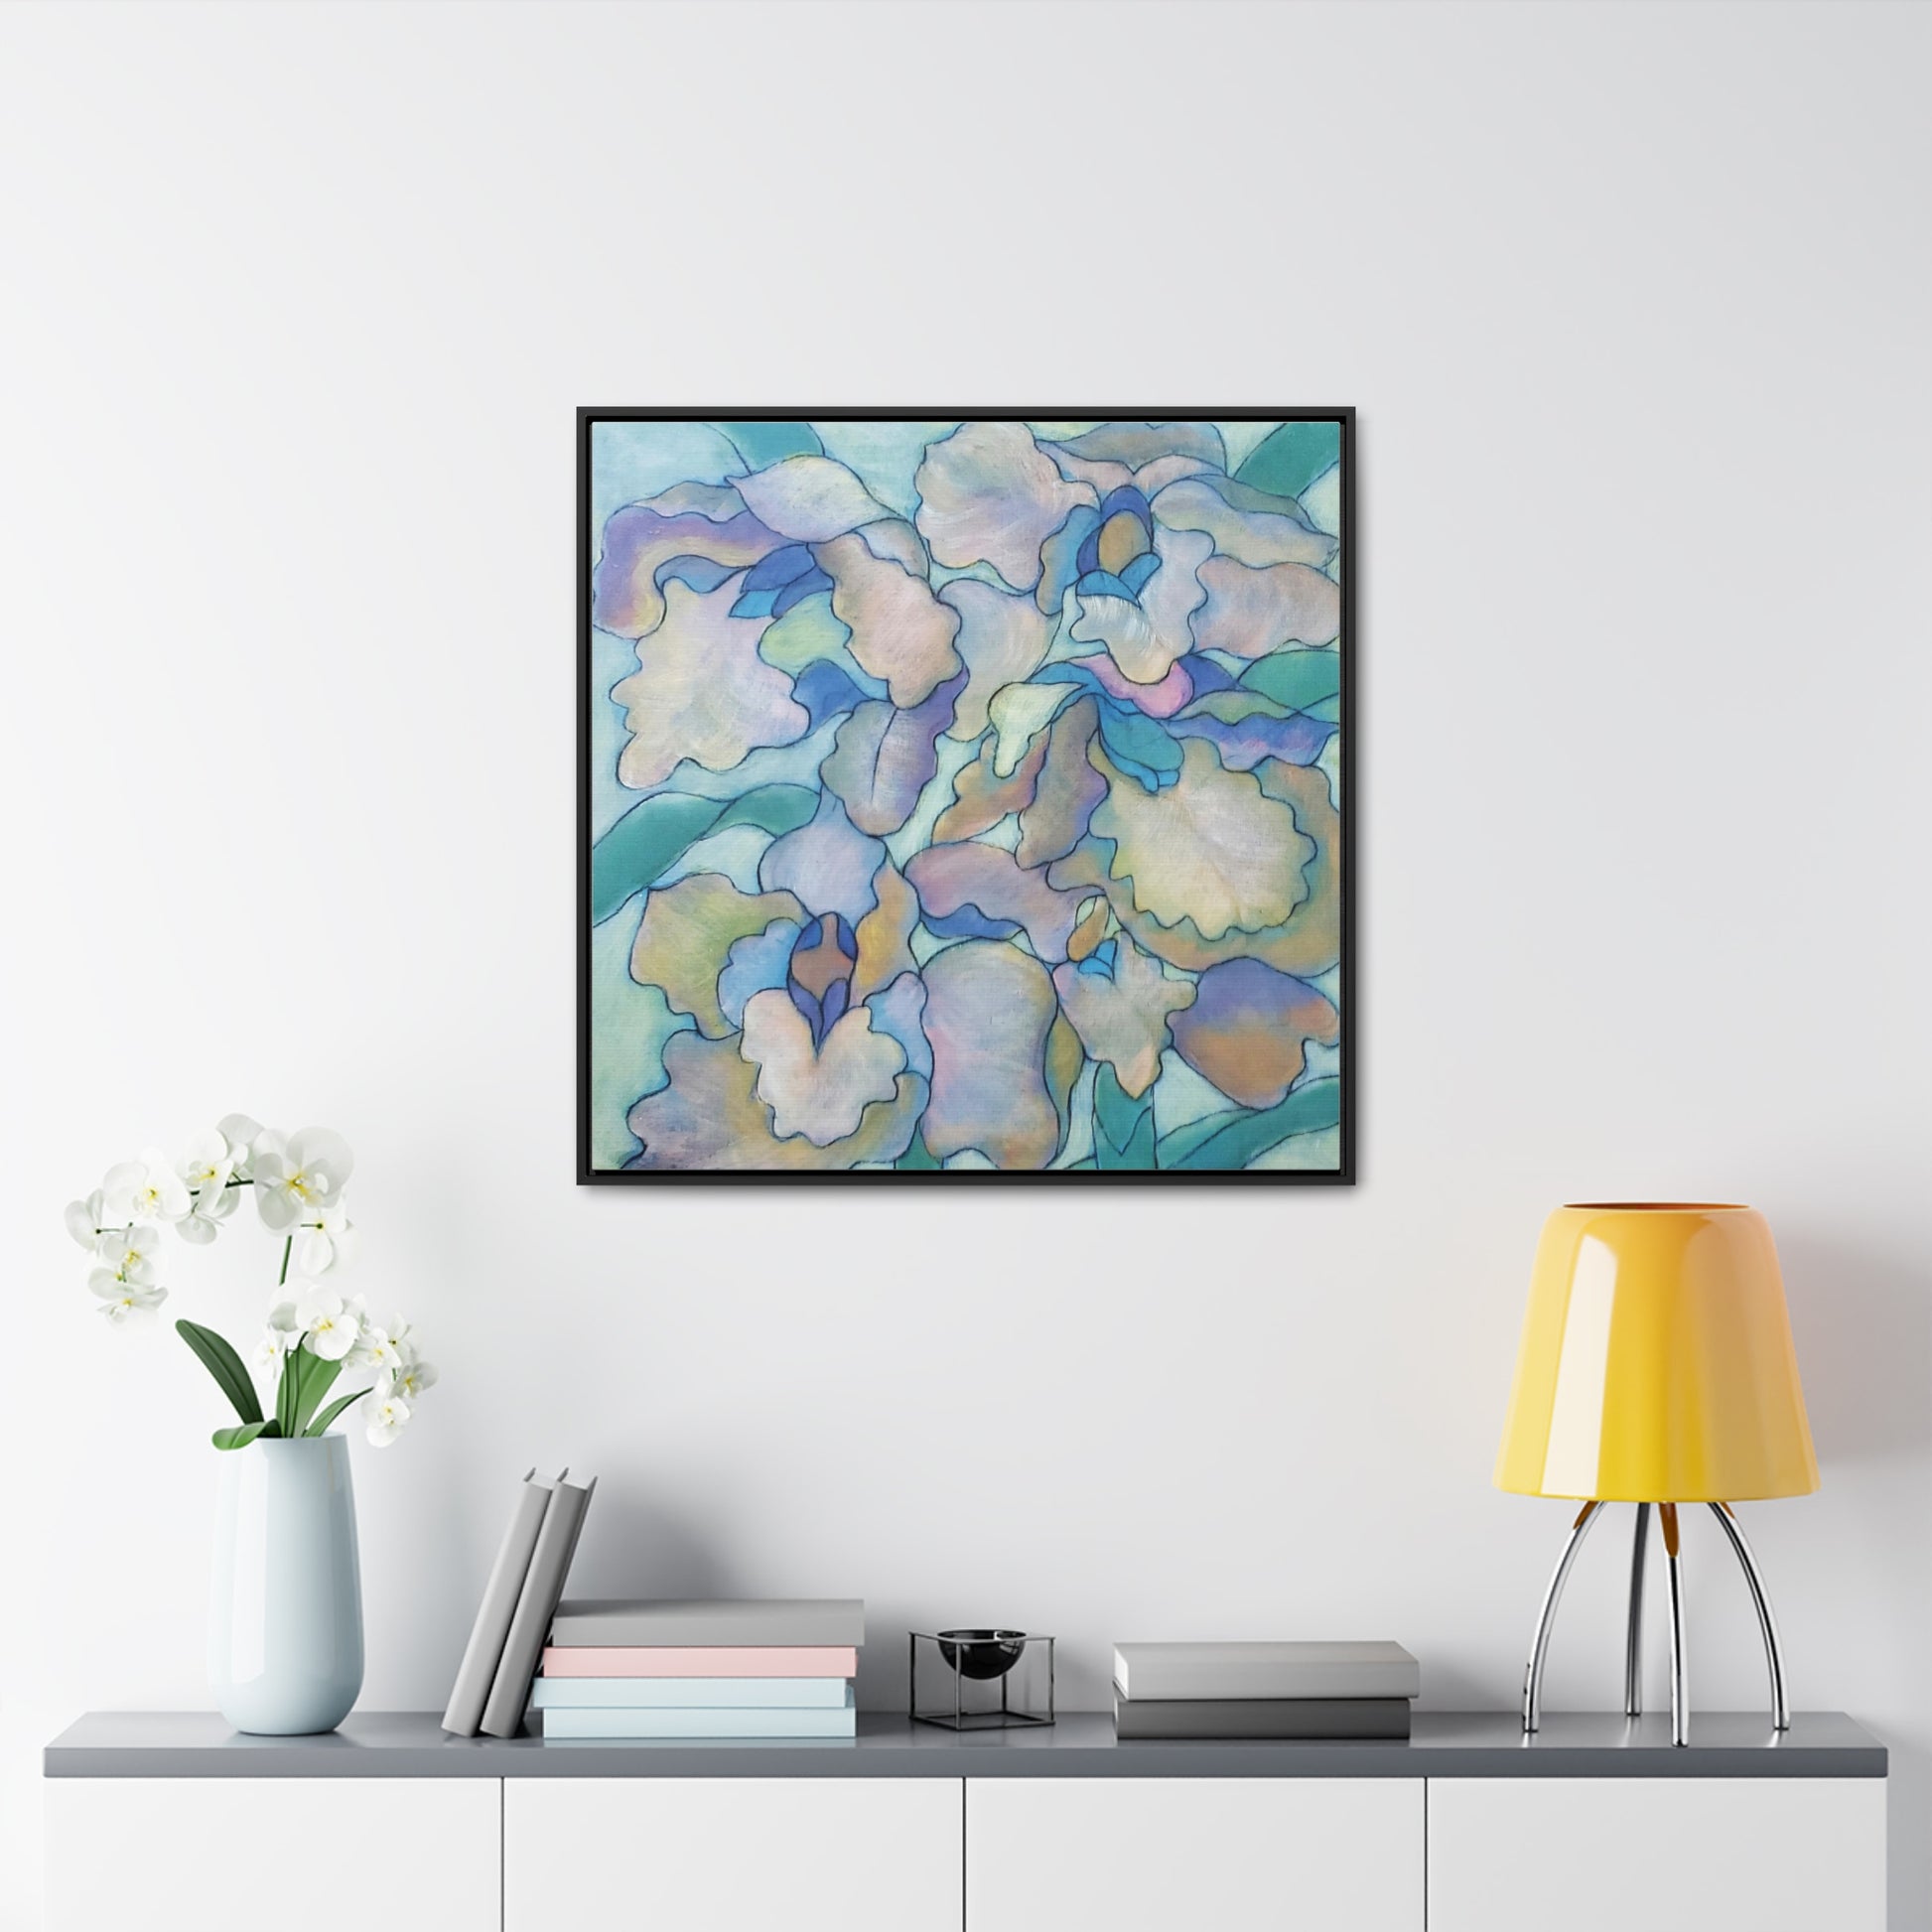 The art piece "Orchid Frenzy" by Yi-li Chin Ward exudes elegance and extravagance. The orchid plant is globally recognized for its captivating beauty and allure, and this piece captures its essence perfectly.